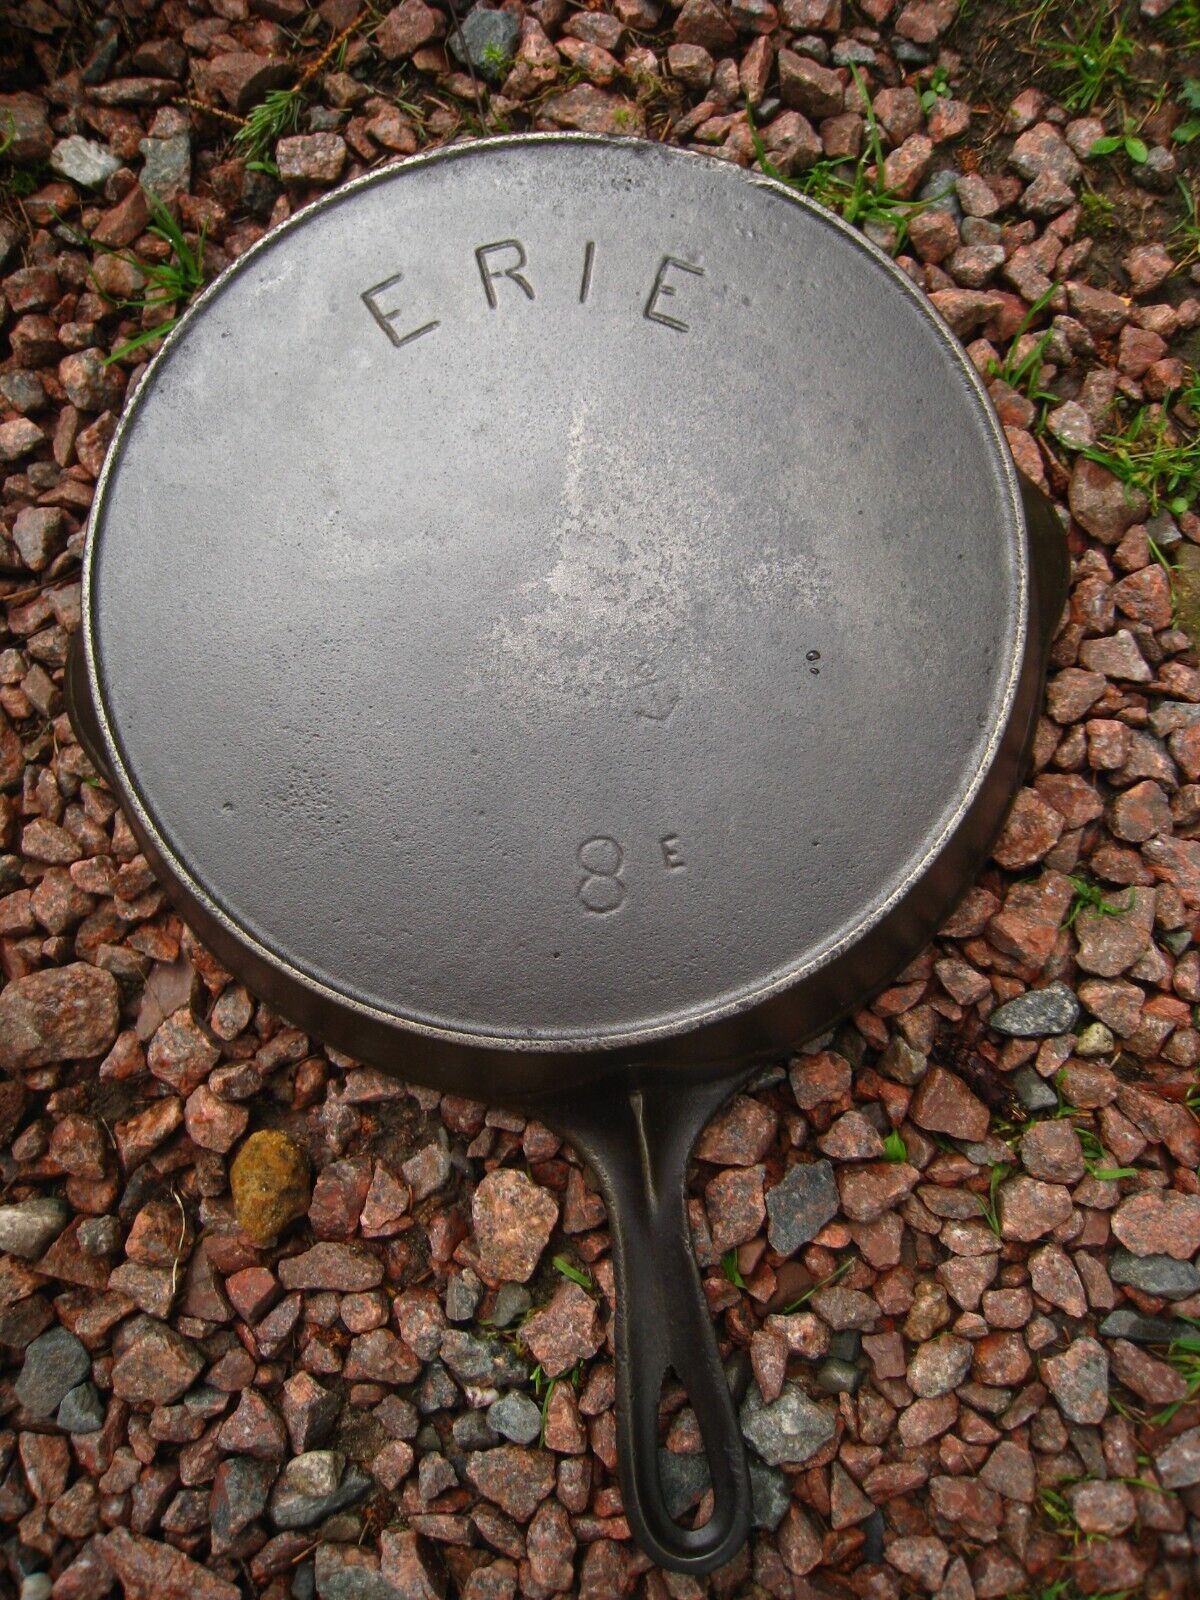 Fully Restored Pre Griswold Erie #8 Cast Iron Skillet with Anchor Maker’s Mark